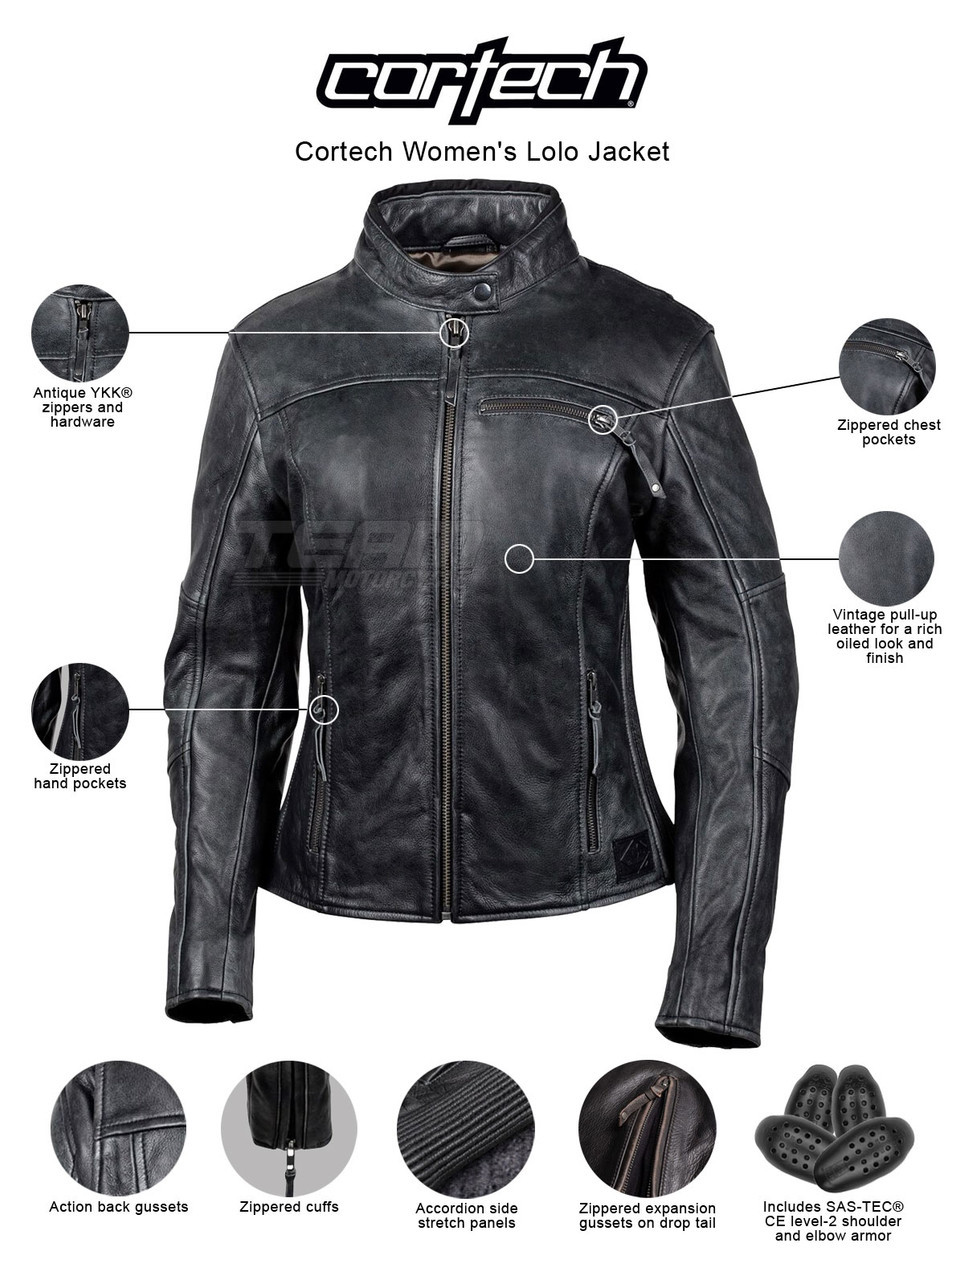 women's armored leather motorcycle jacket